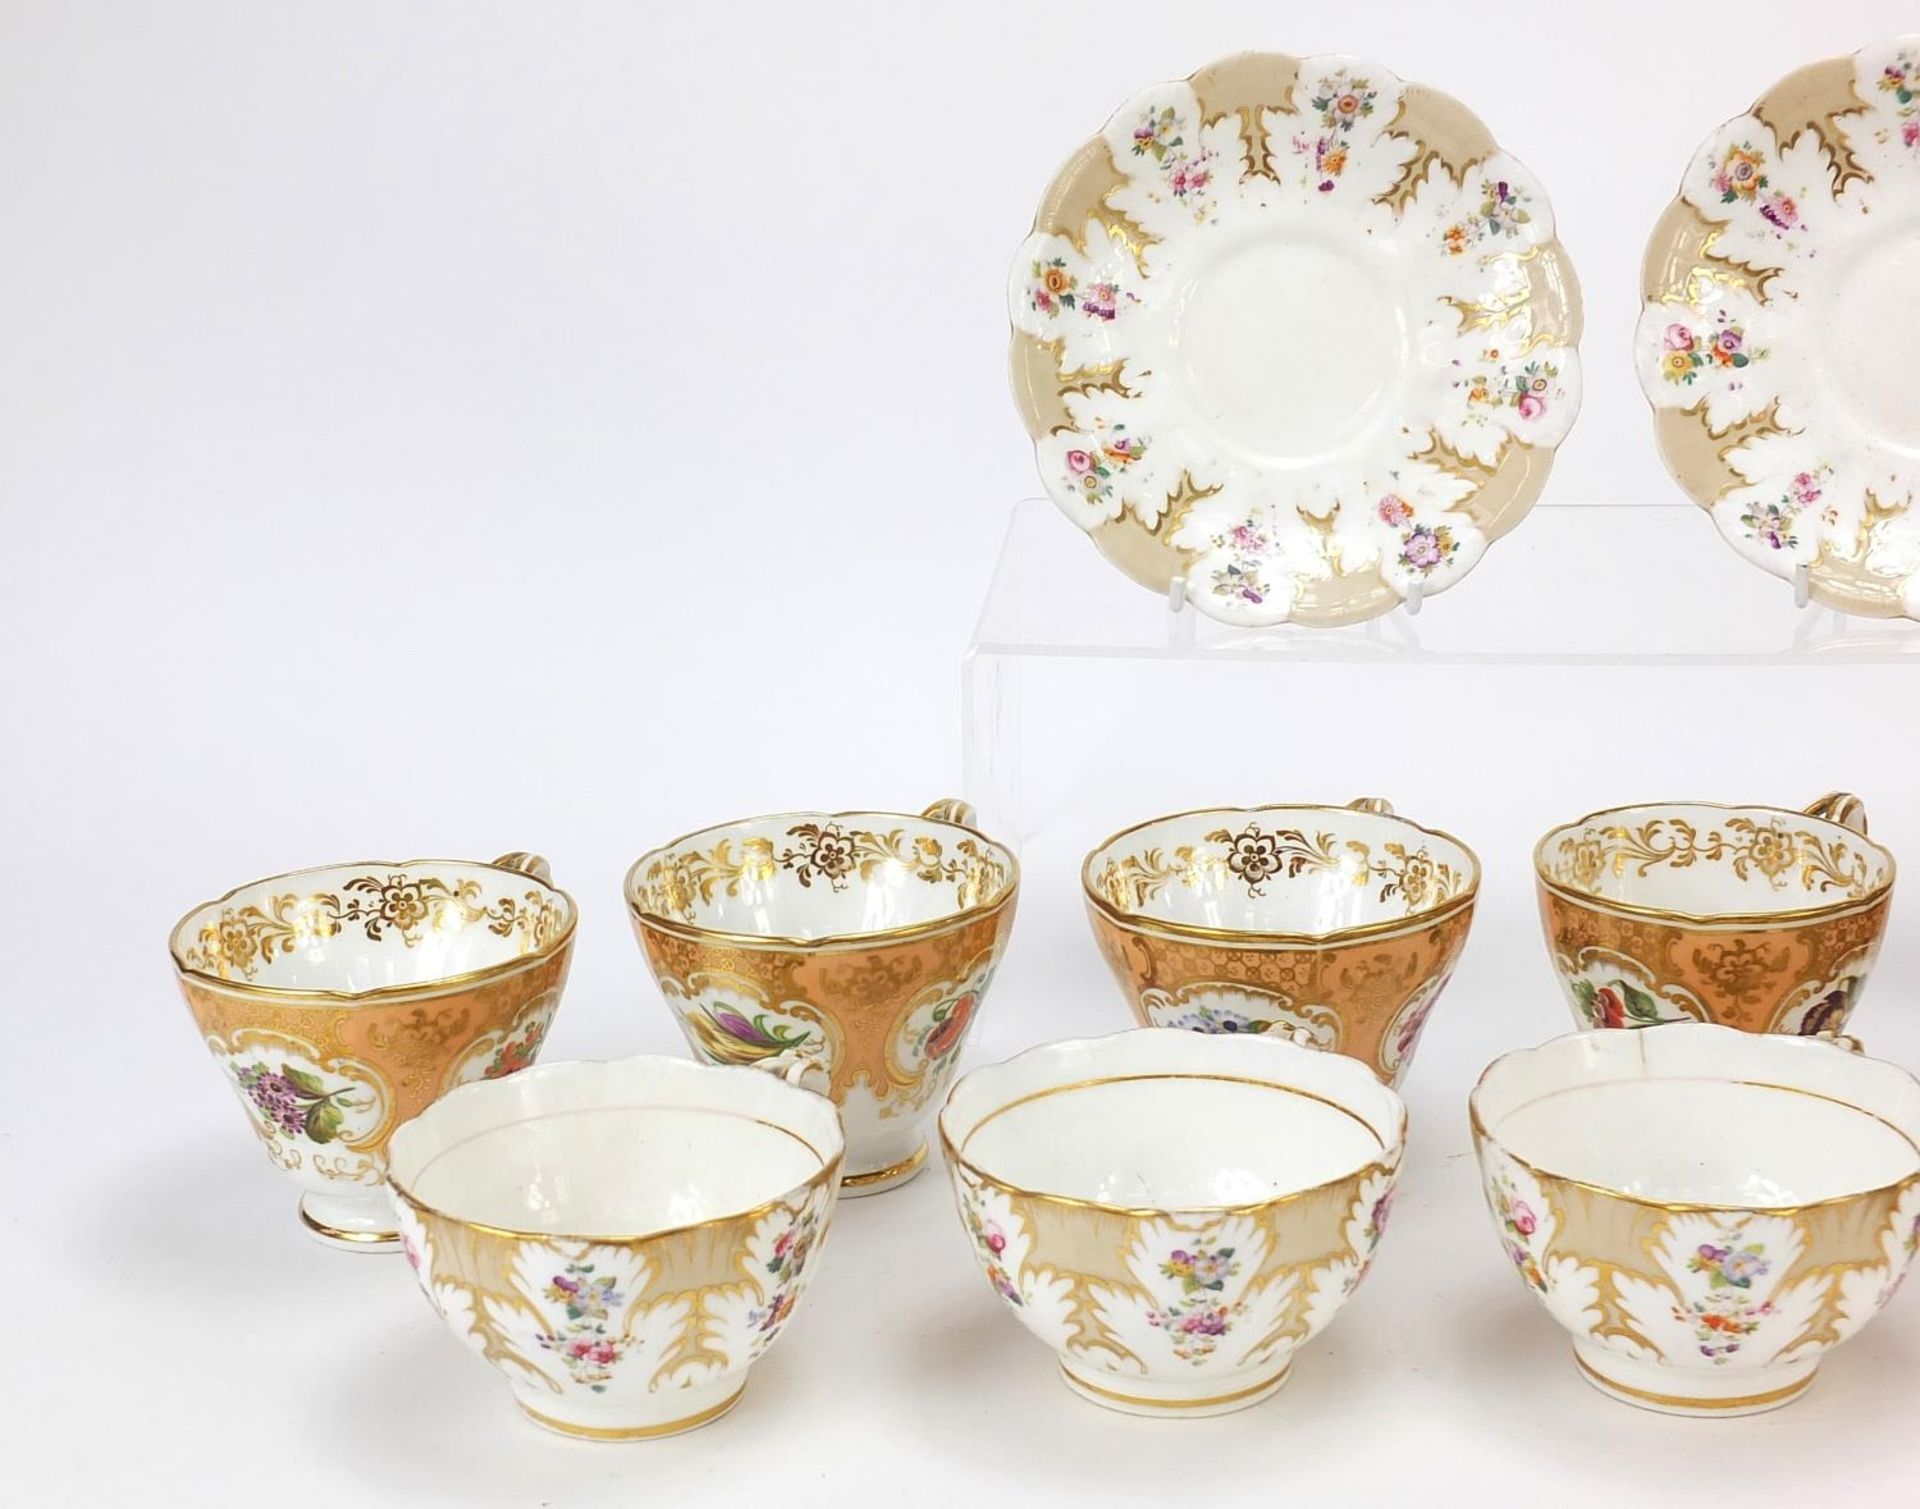 Early 19th century English teaware hand painted with flowers, patter number 174 and 2253, the - Image 2 of 7